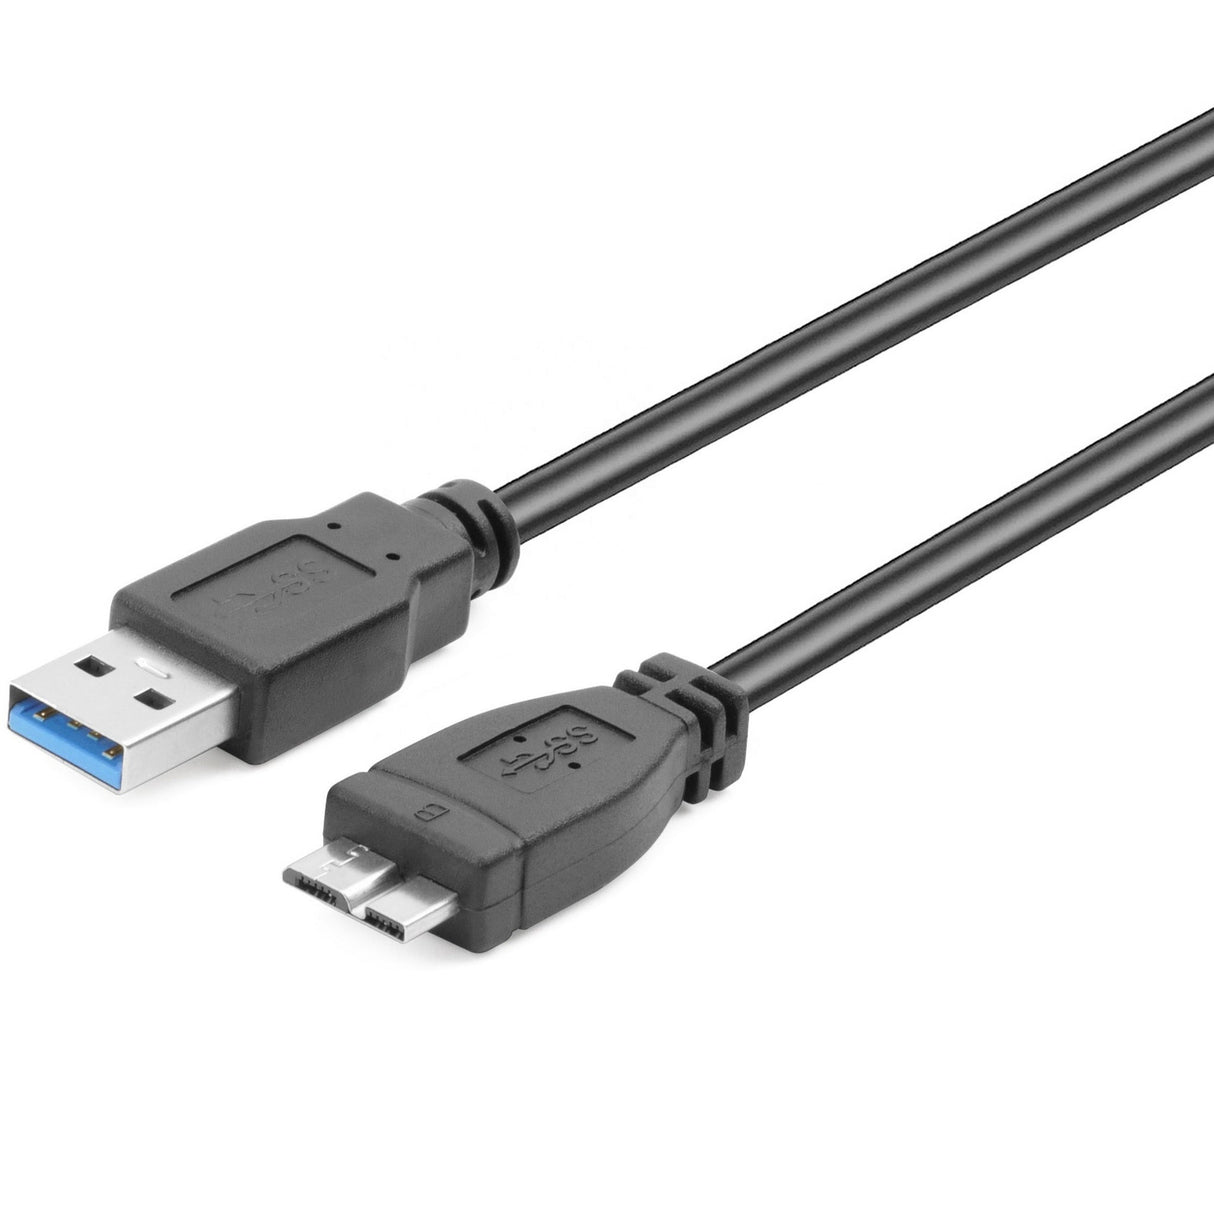 Elmo Replacement USB Cable for MX-1, MX-P and MX-P2